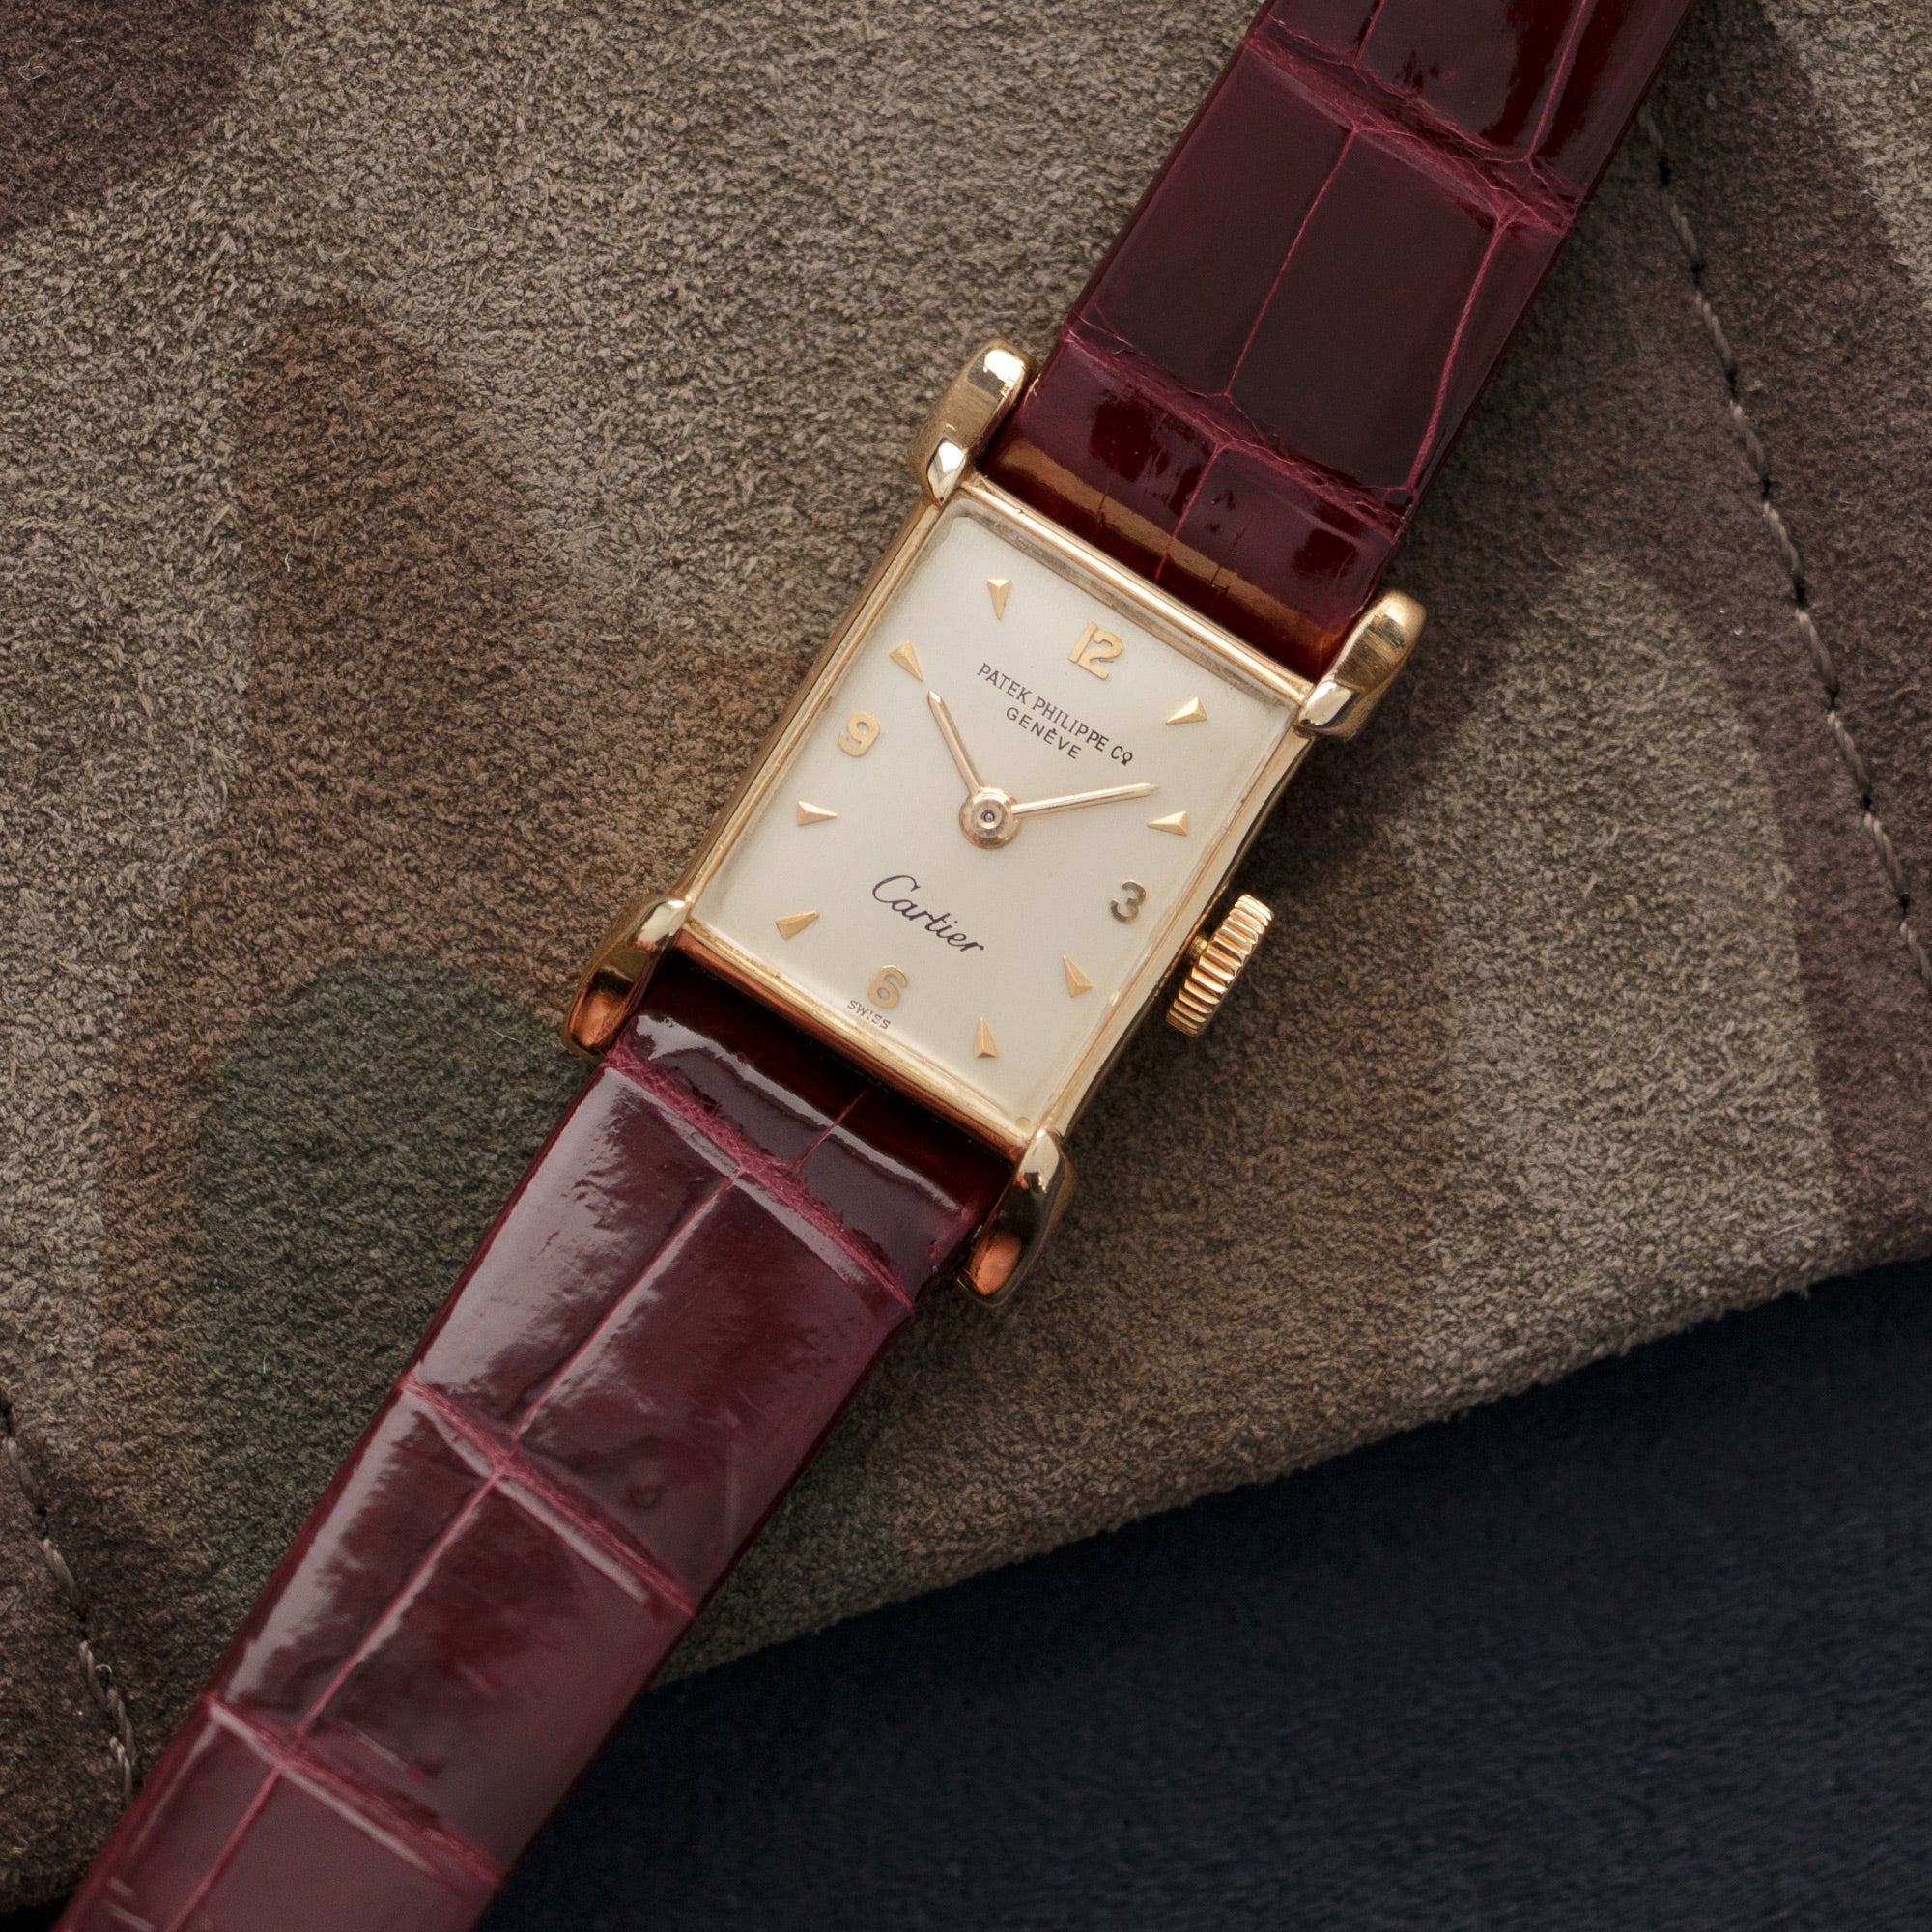 Patek Philippe - Patek Philippe Yellow Gold Watch Ref. 2280, Retailed by Cartier - The Keystone Watches